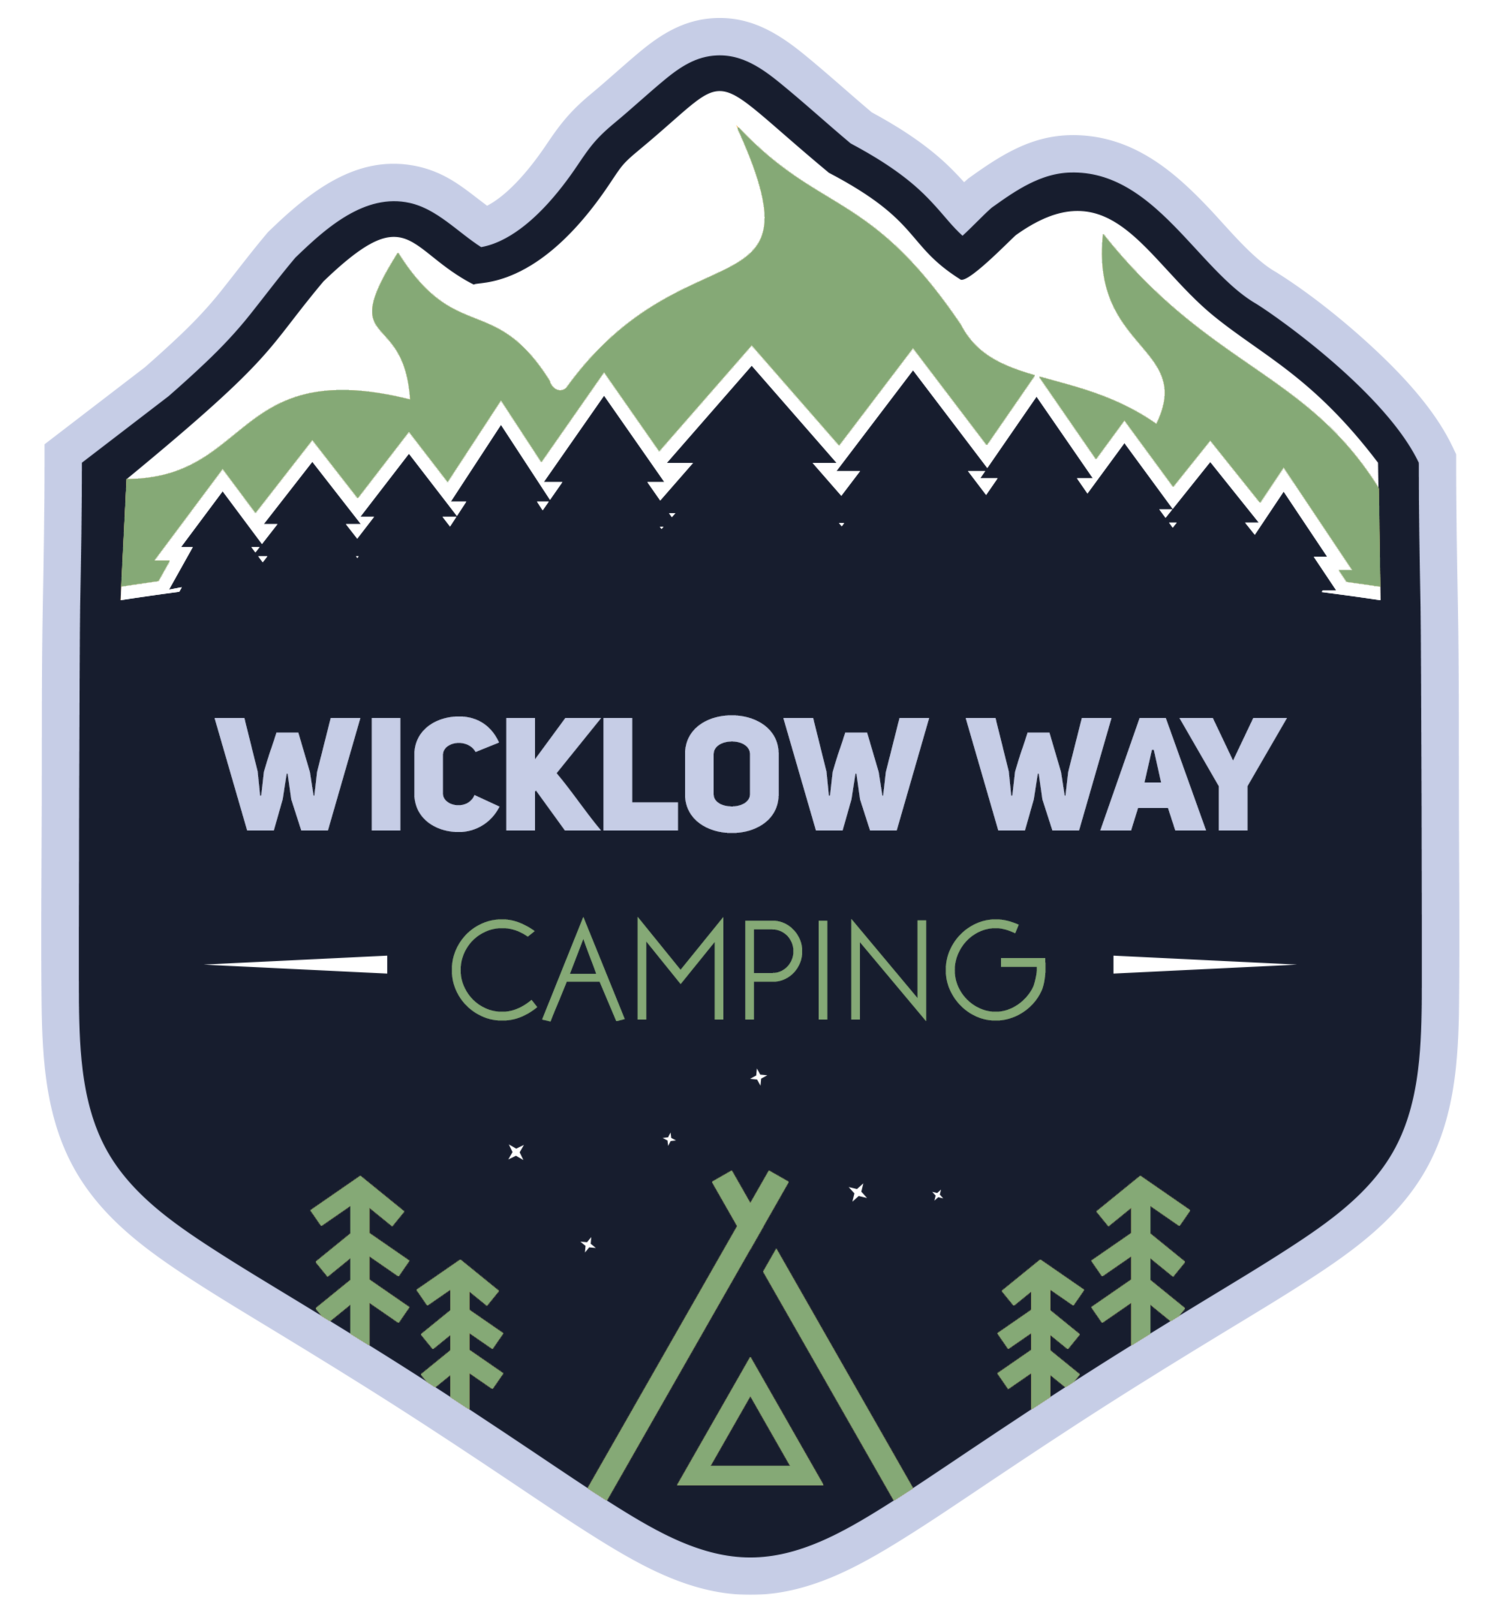 Wicklow Way Camping